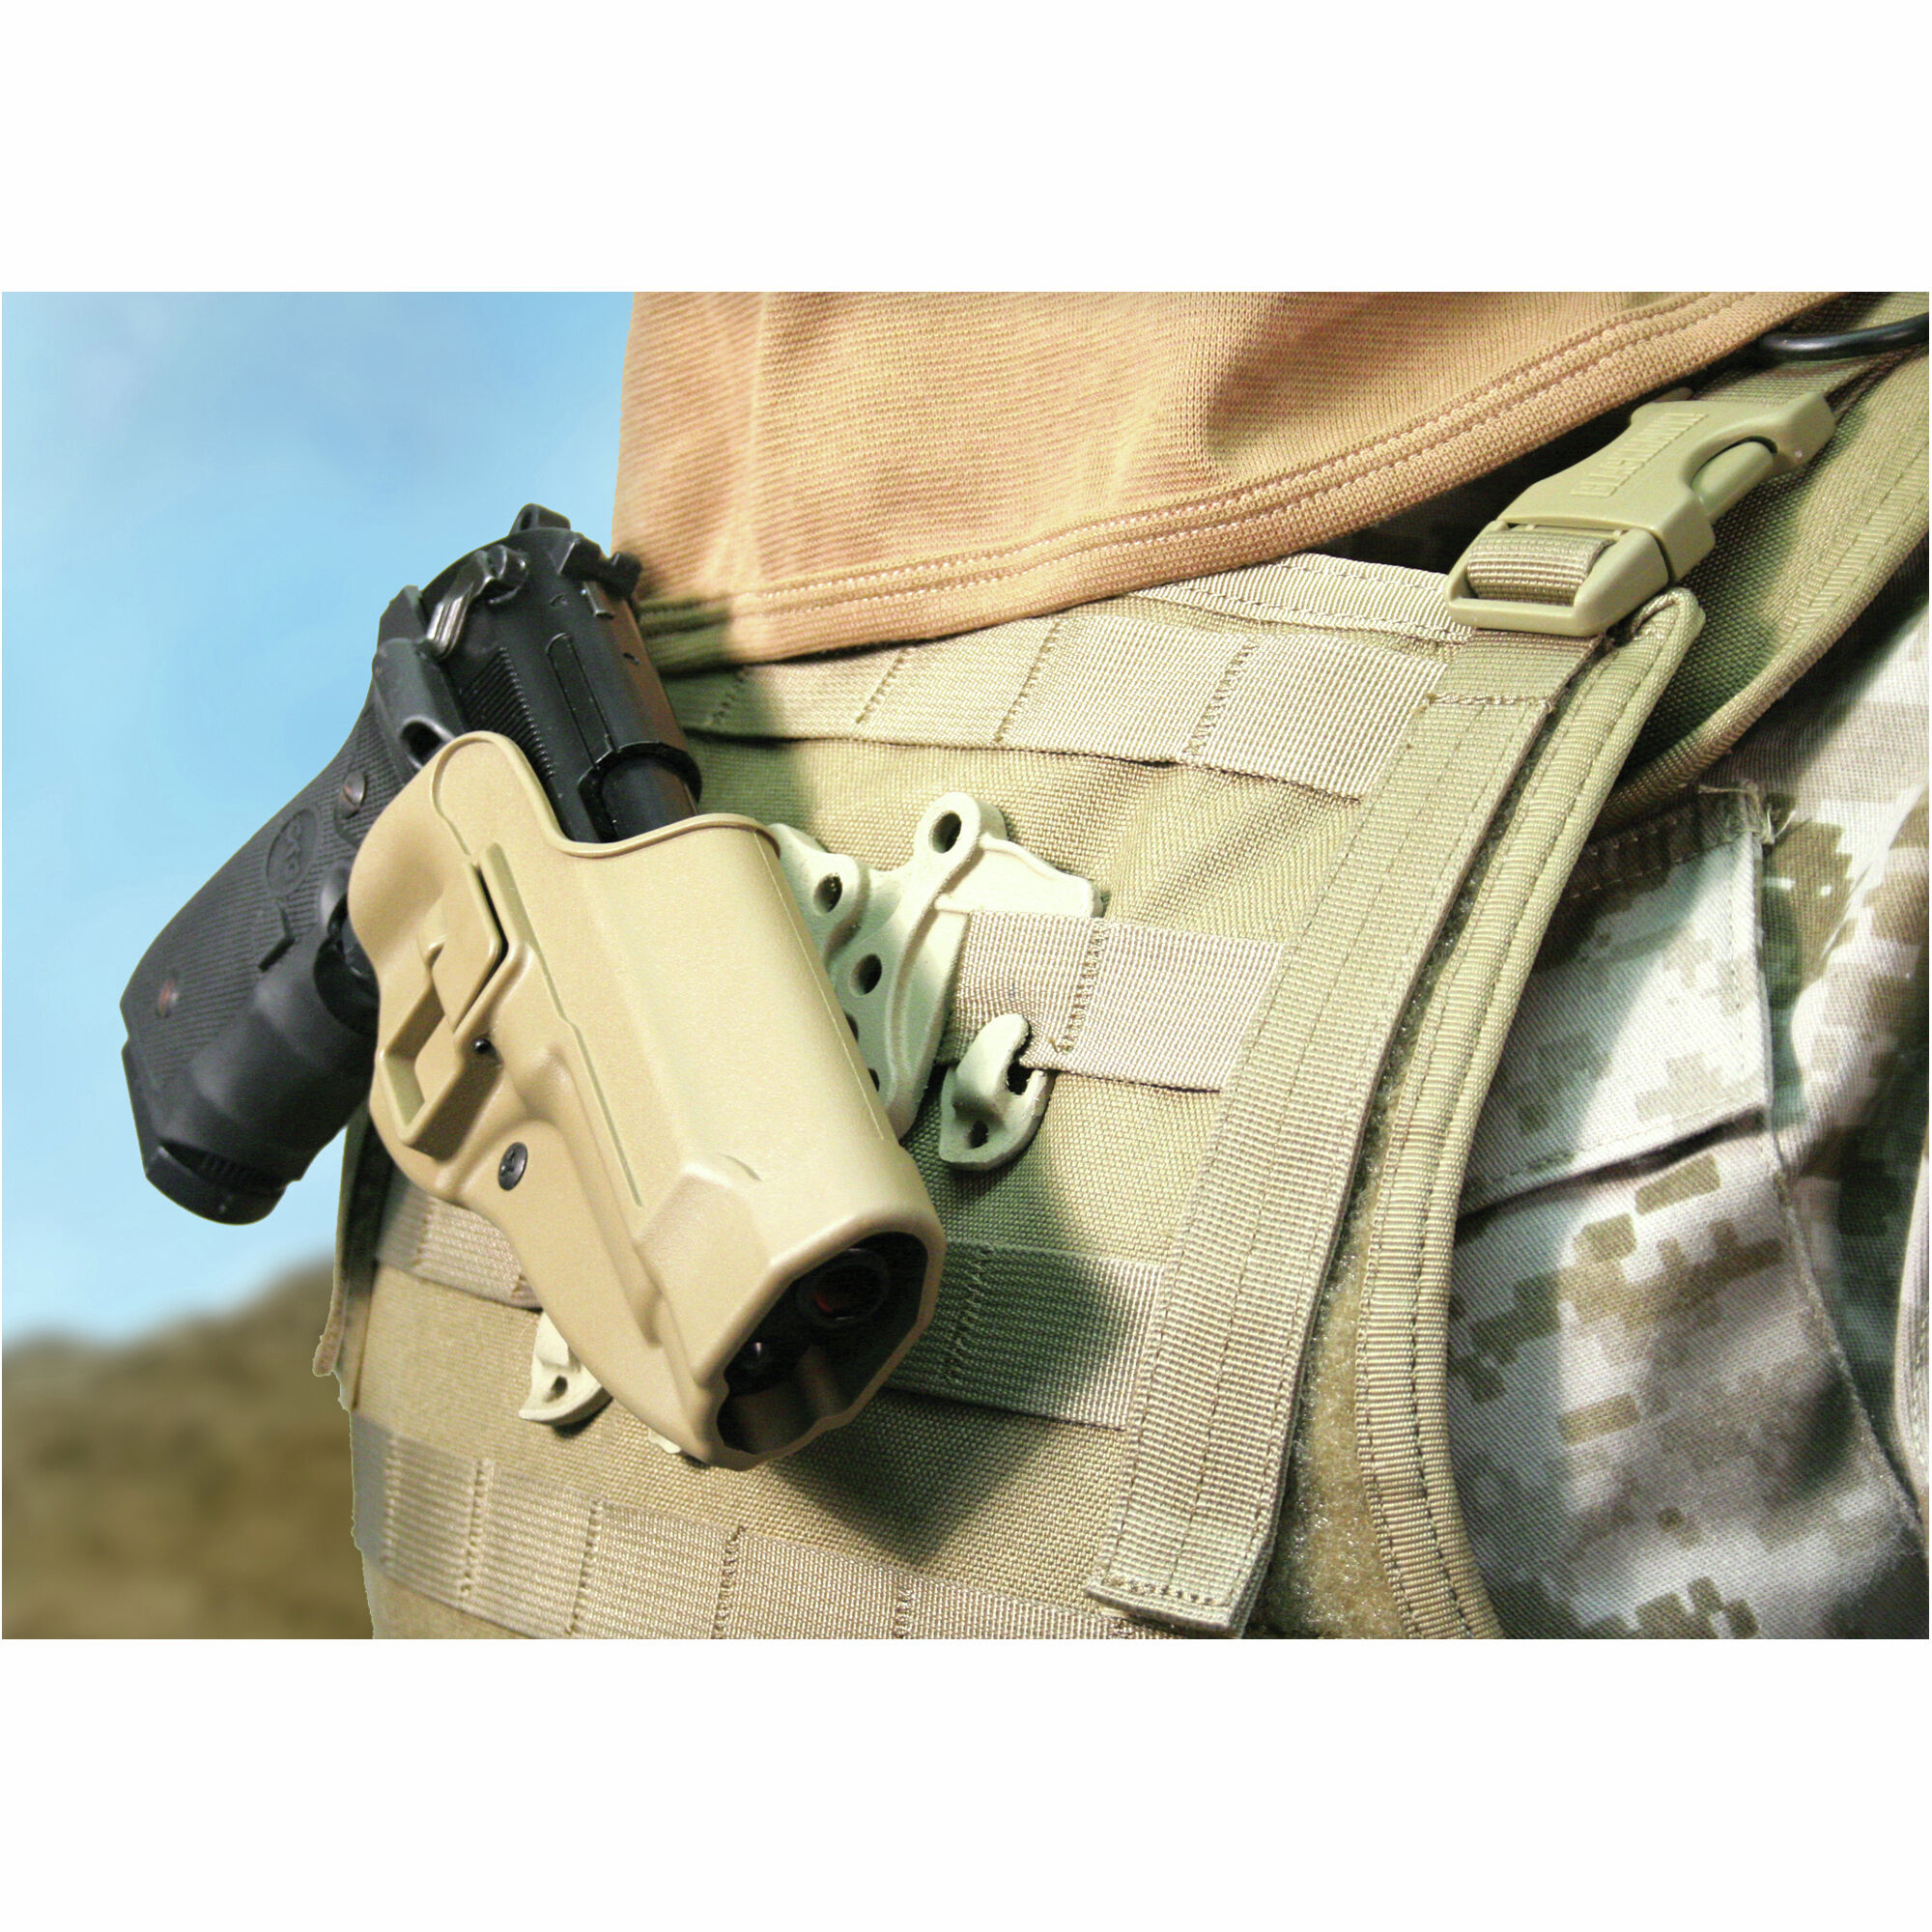 CQC Serpa Right Hand Pistol Holster w/MOLLE & Mag Pouch for Beretta 92 96 M9 M92